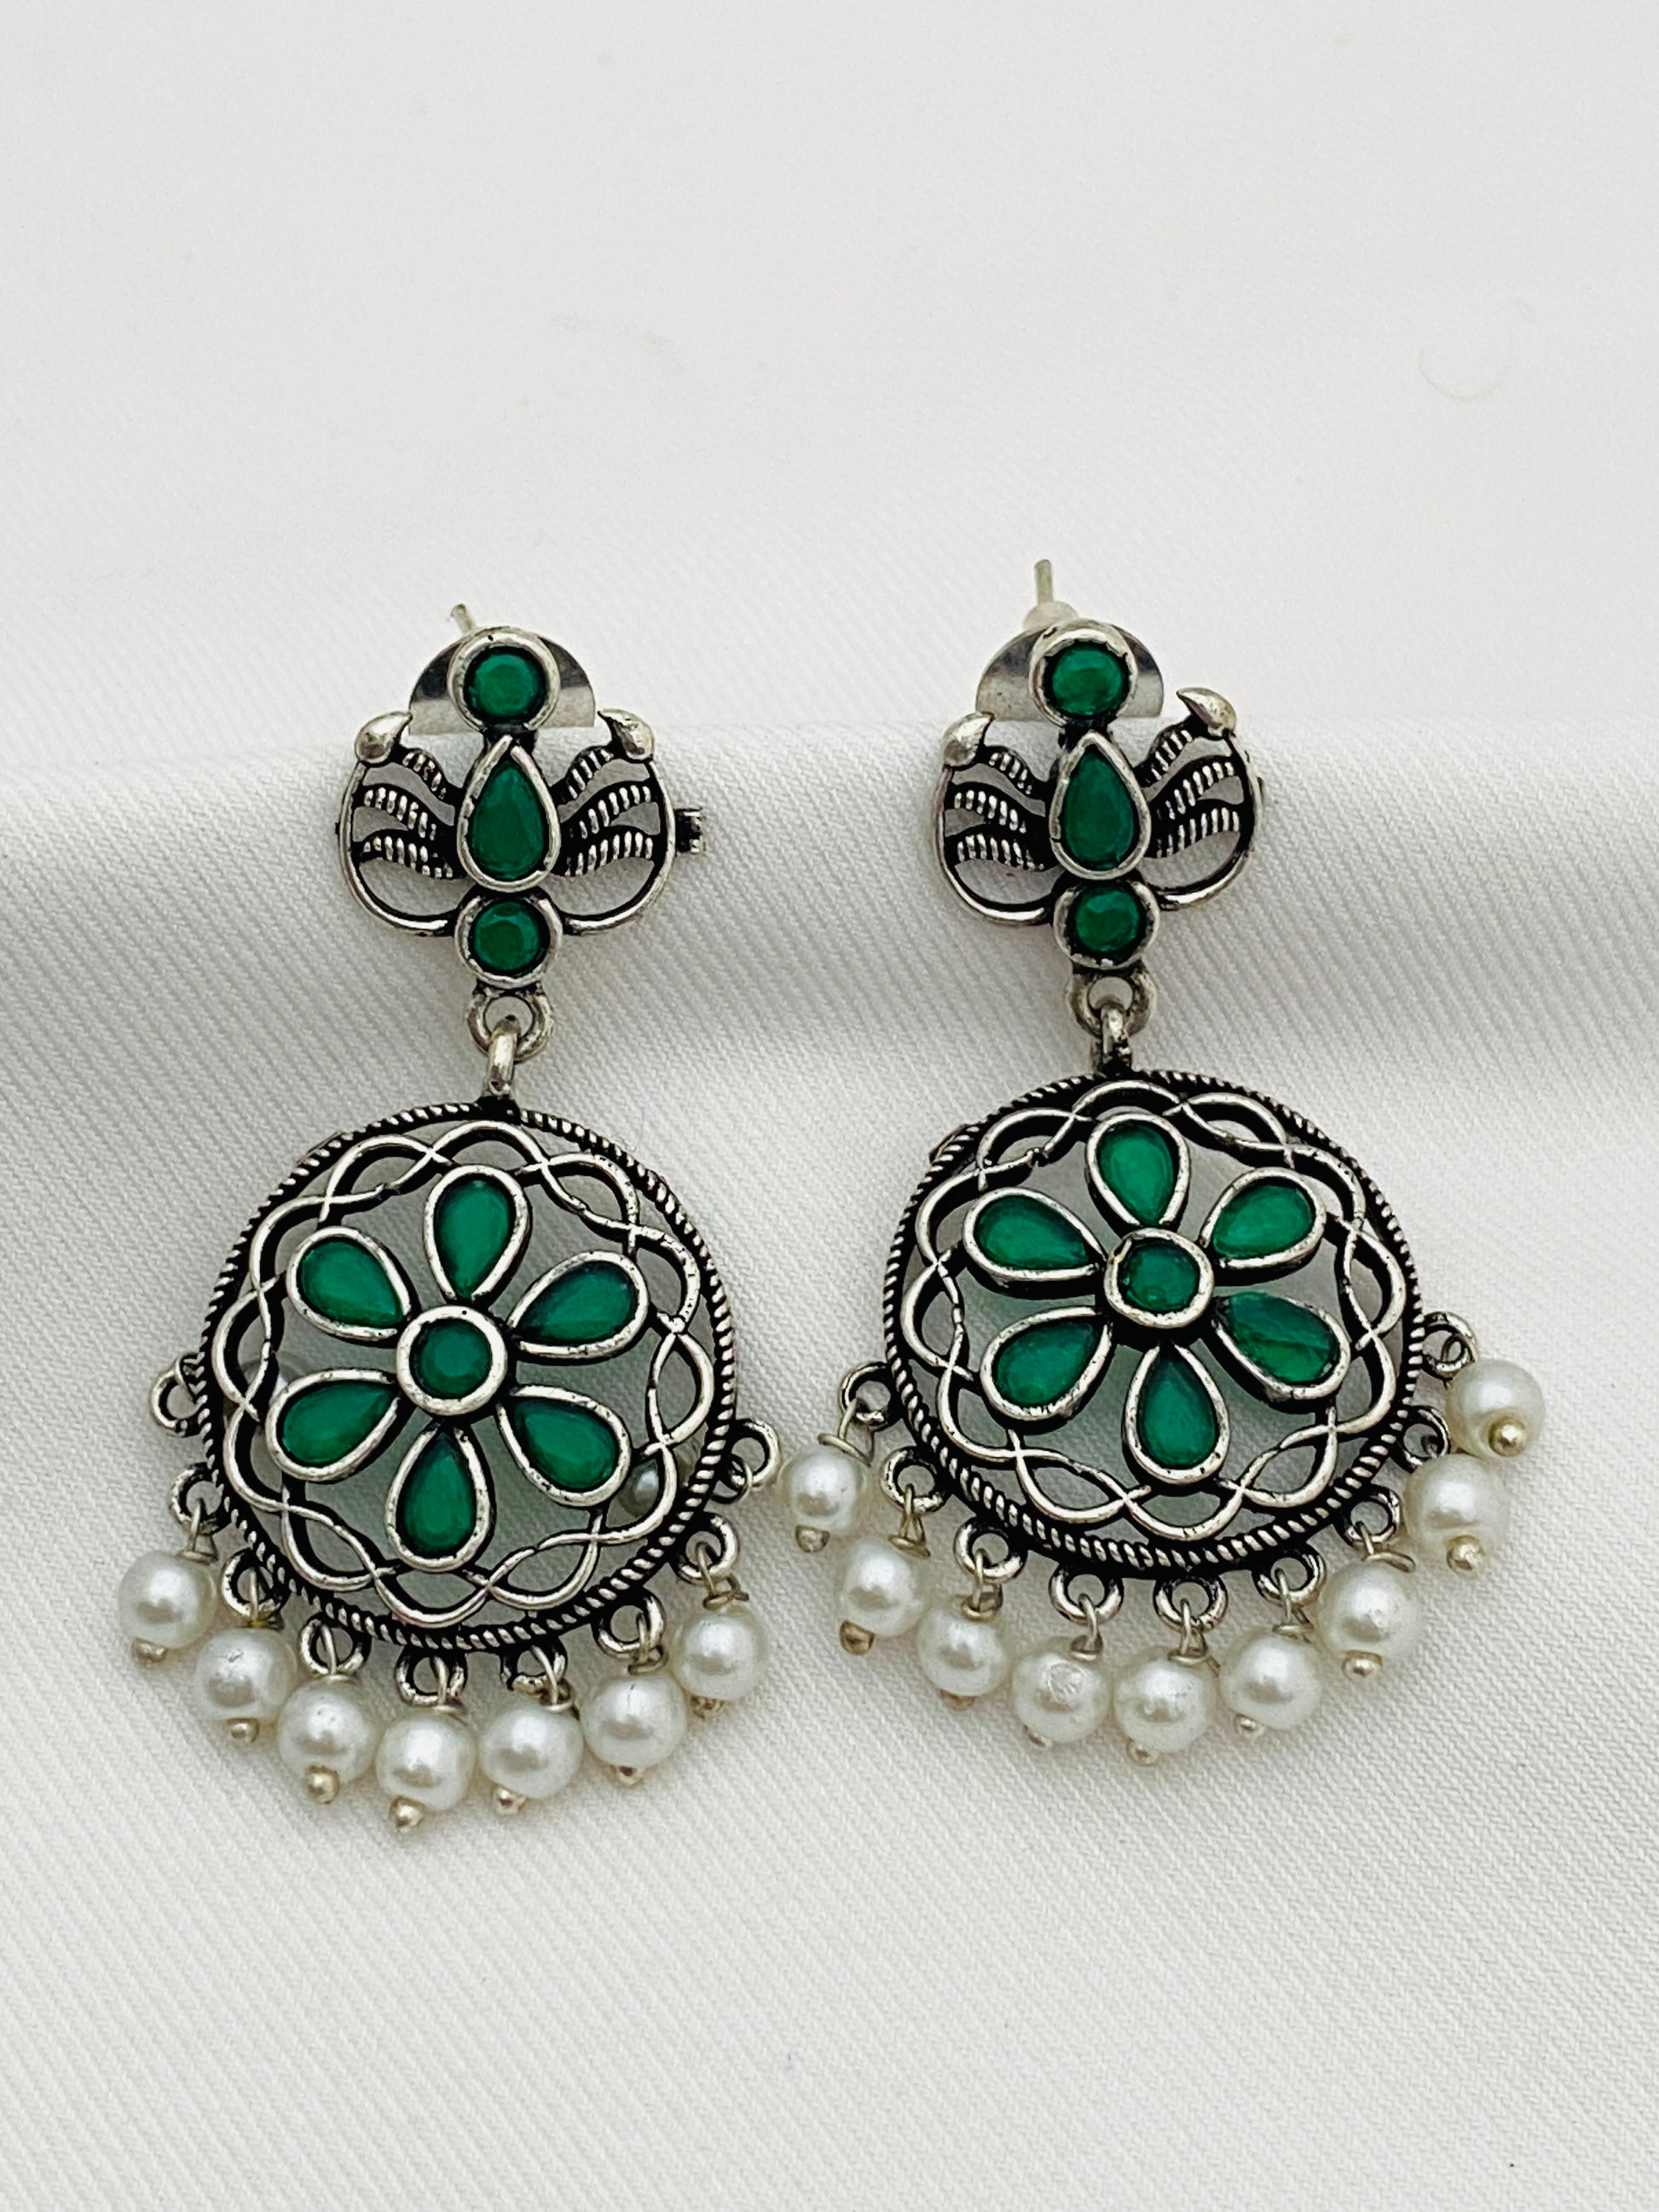 Gorgeous Emerald Stone Studded Flower Designed Silver Toned Oxidized Earrings With Pearl Drops